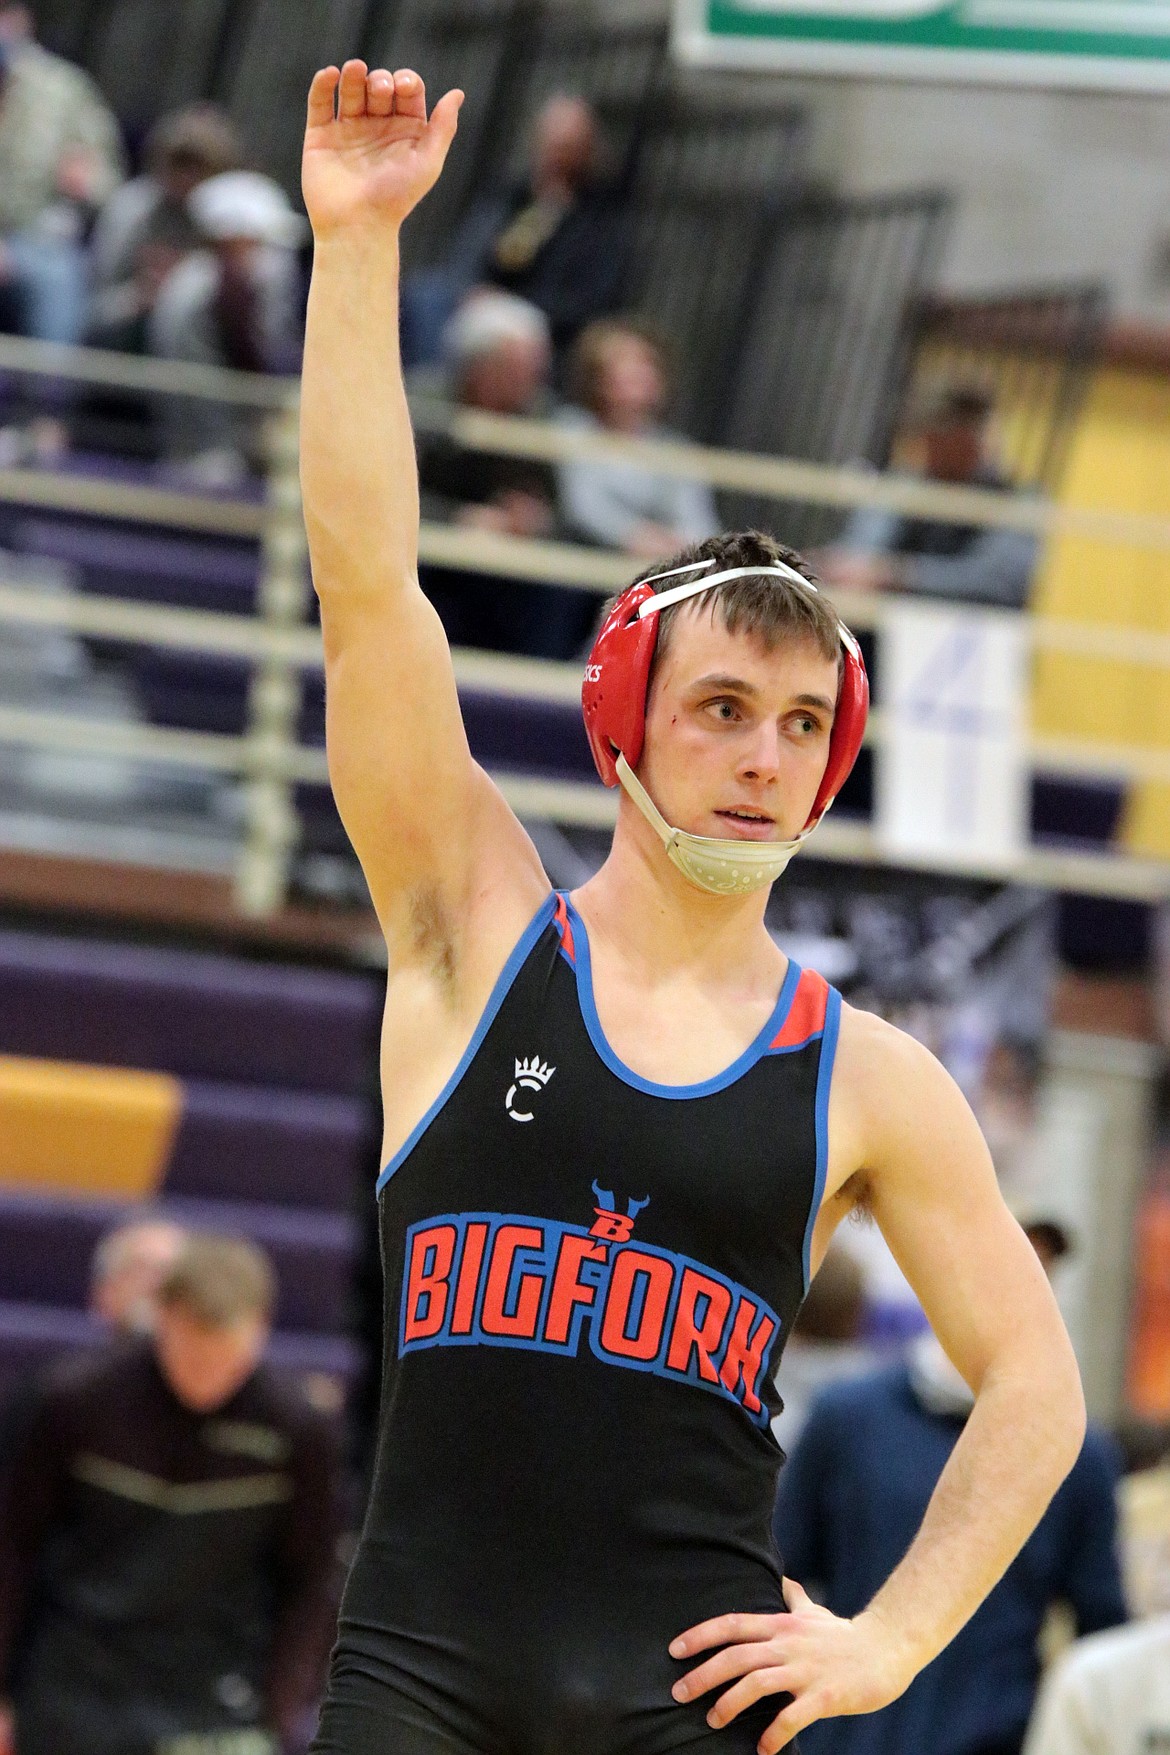 Ryder Nollan celebrates after defeating Cut Bank's Caleb Simpson at the Class B/C Divisional wrestling meet in Cut Bank.
Courtesy Sally Anderson